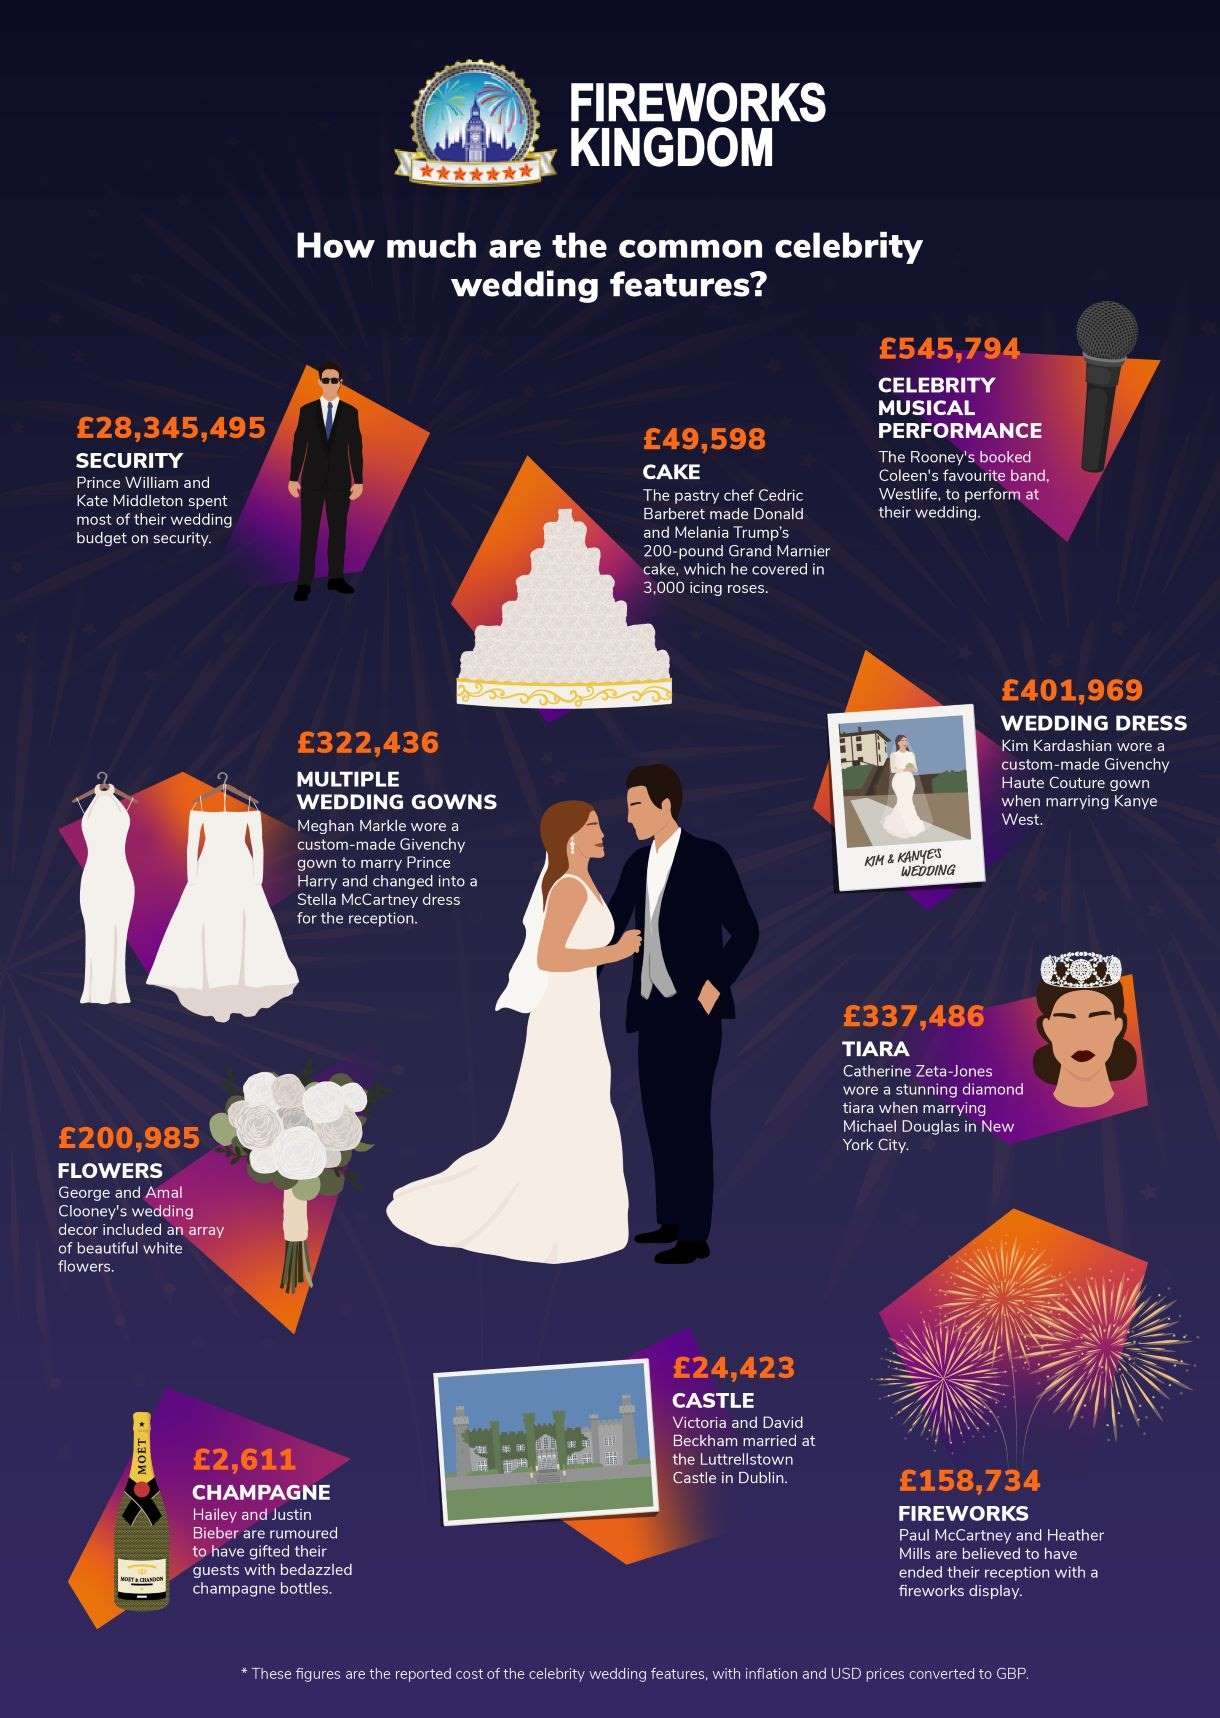 An infographic showing how much celebrity couples reportedly spent on luxurious wedding features.